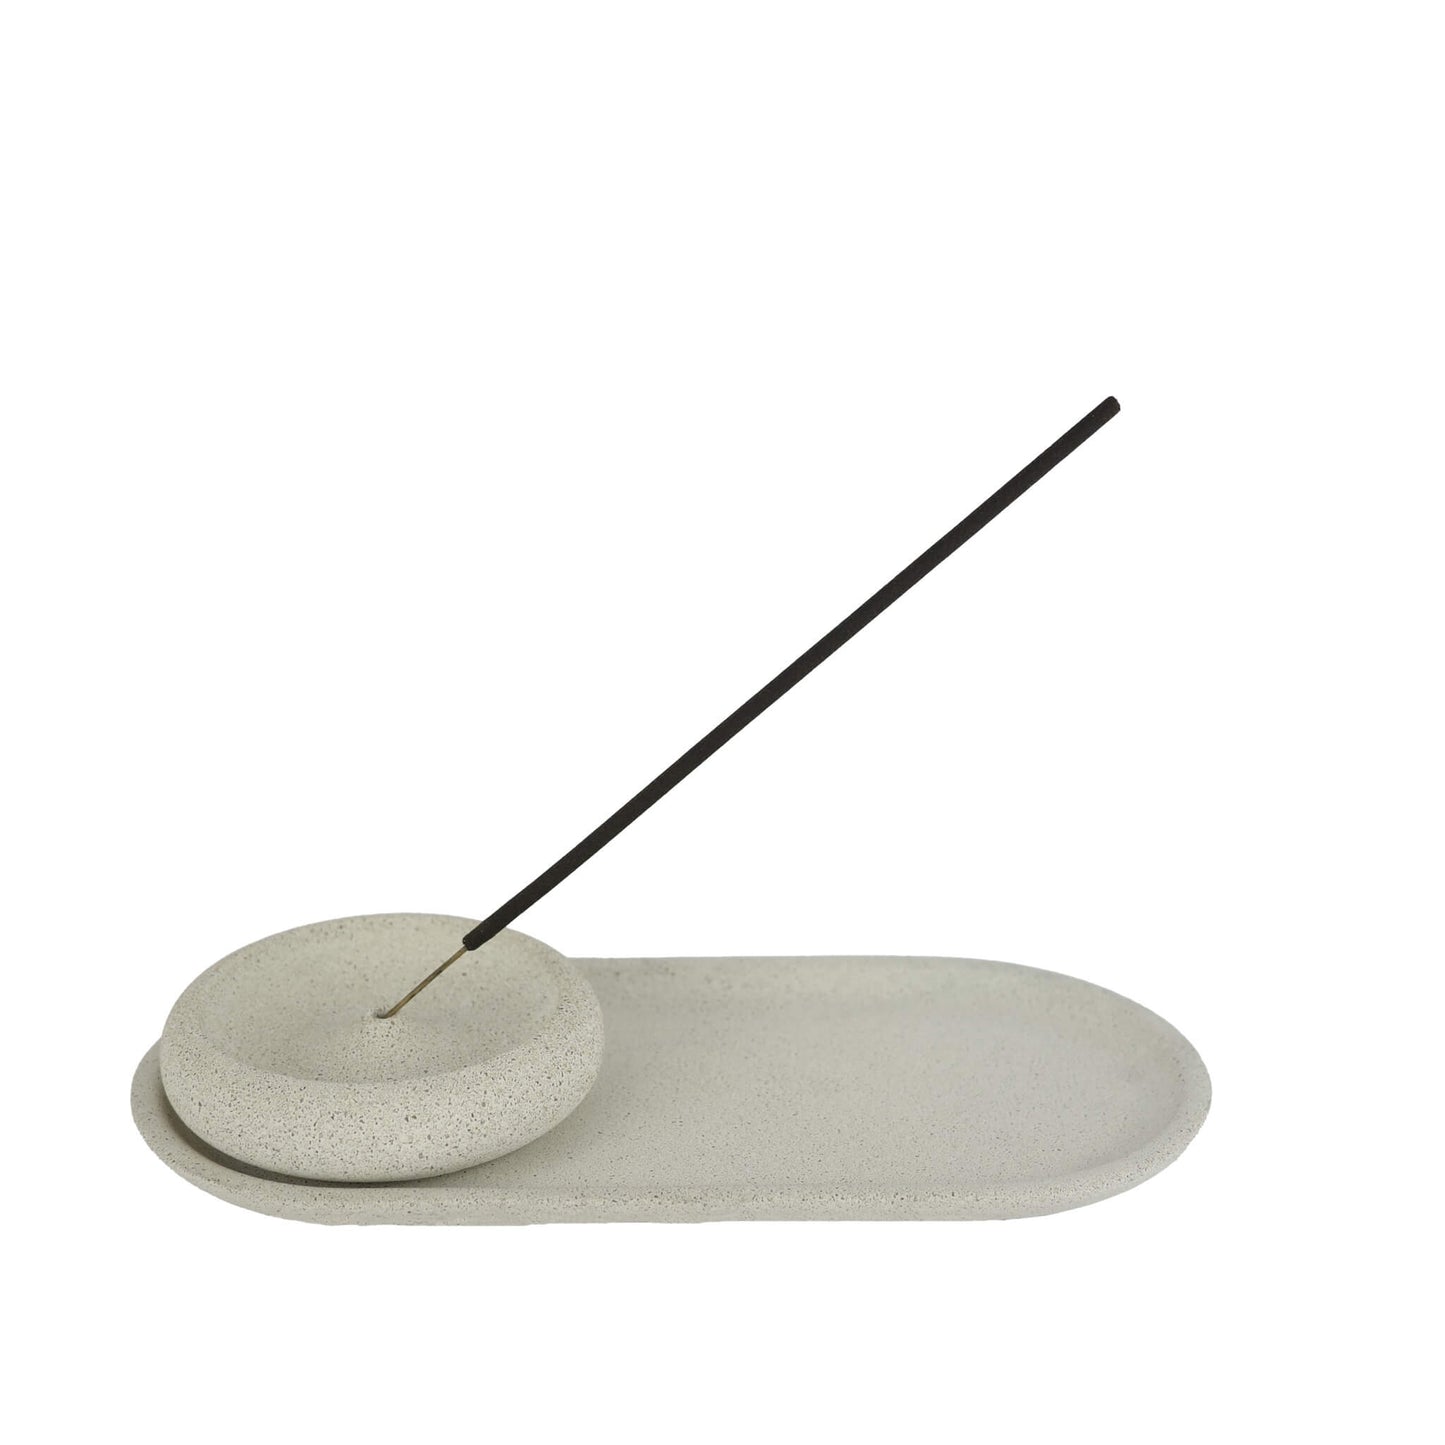 Beige concrete tray with matching incense holder